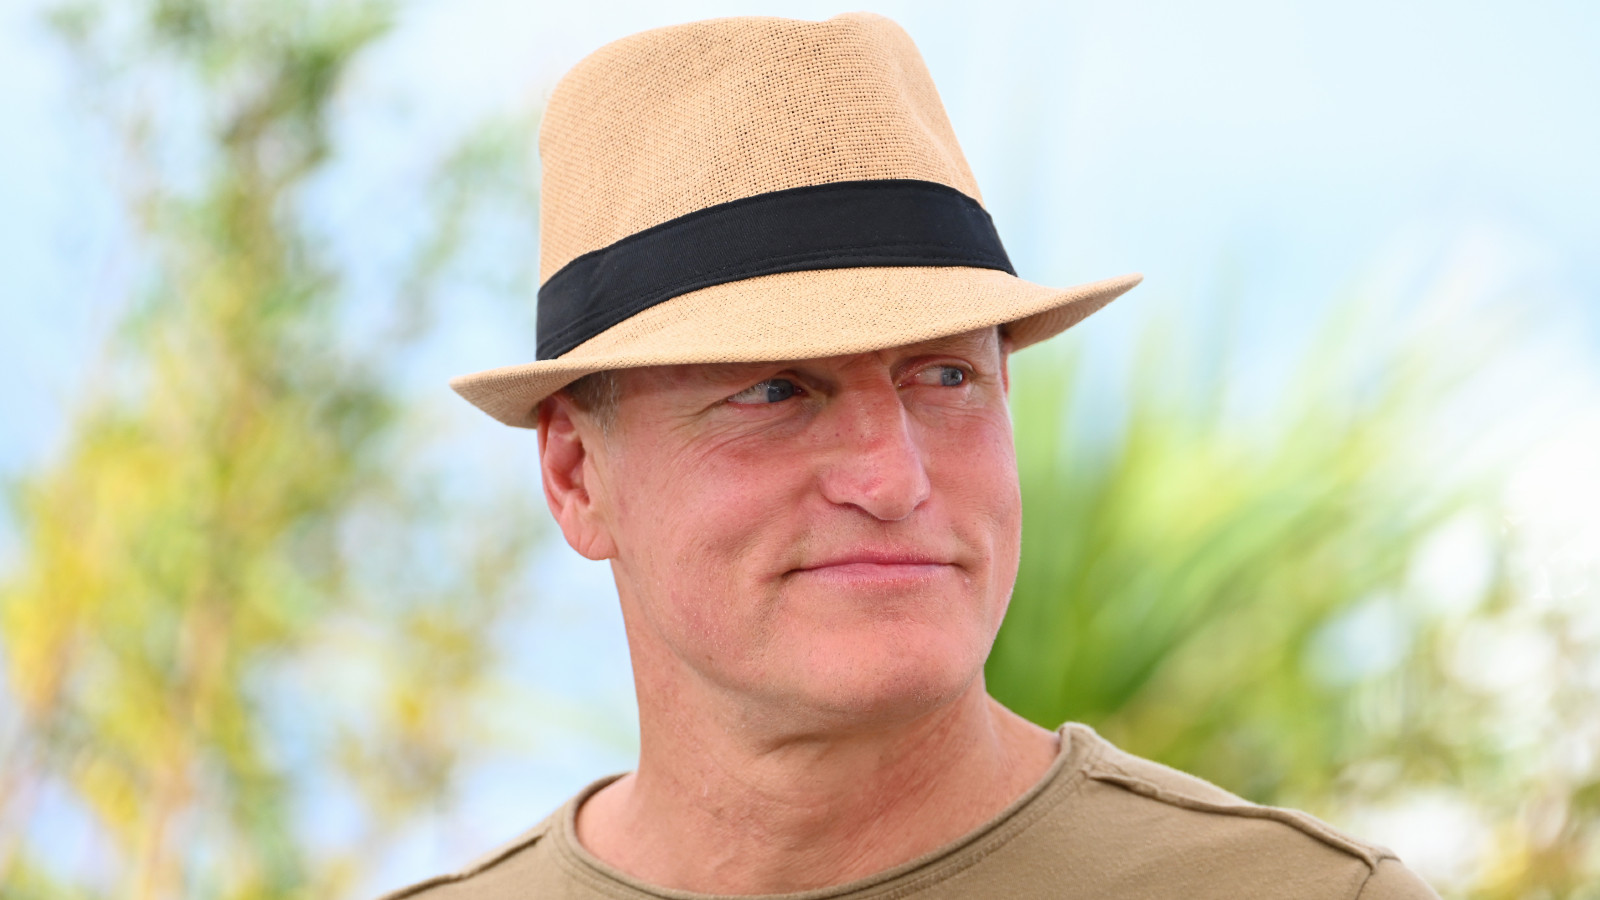 Woody Harrelson attends the photocall for "Triangle Of Sadness" during the 75th annual Cannes film festival at Palais des Festivals on May 22, 2022 in Cannes, France.